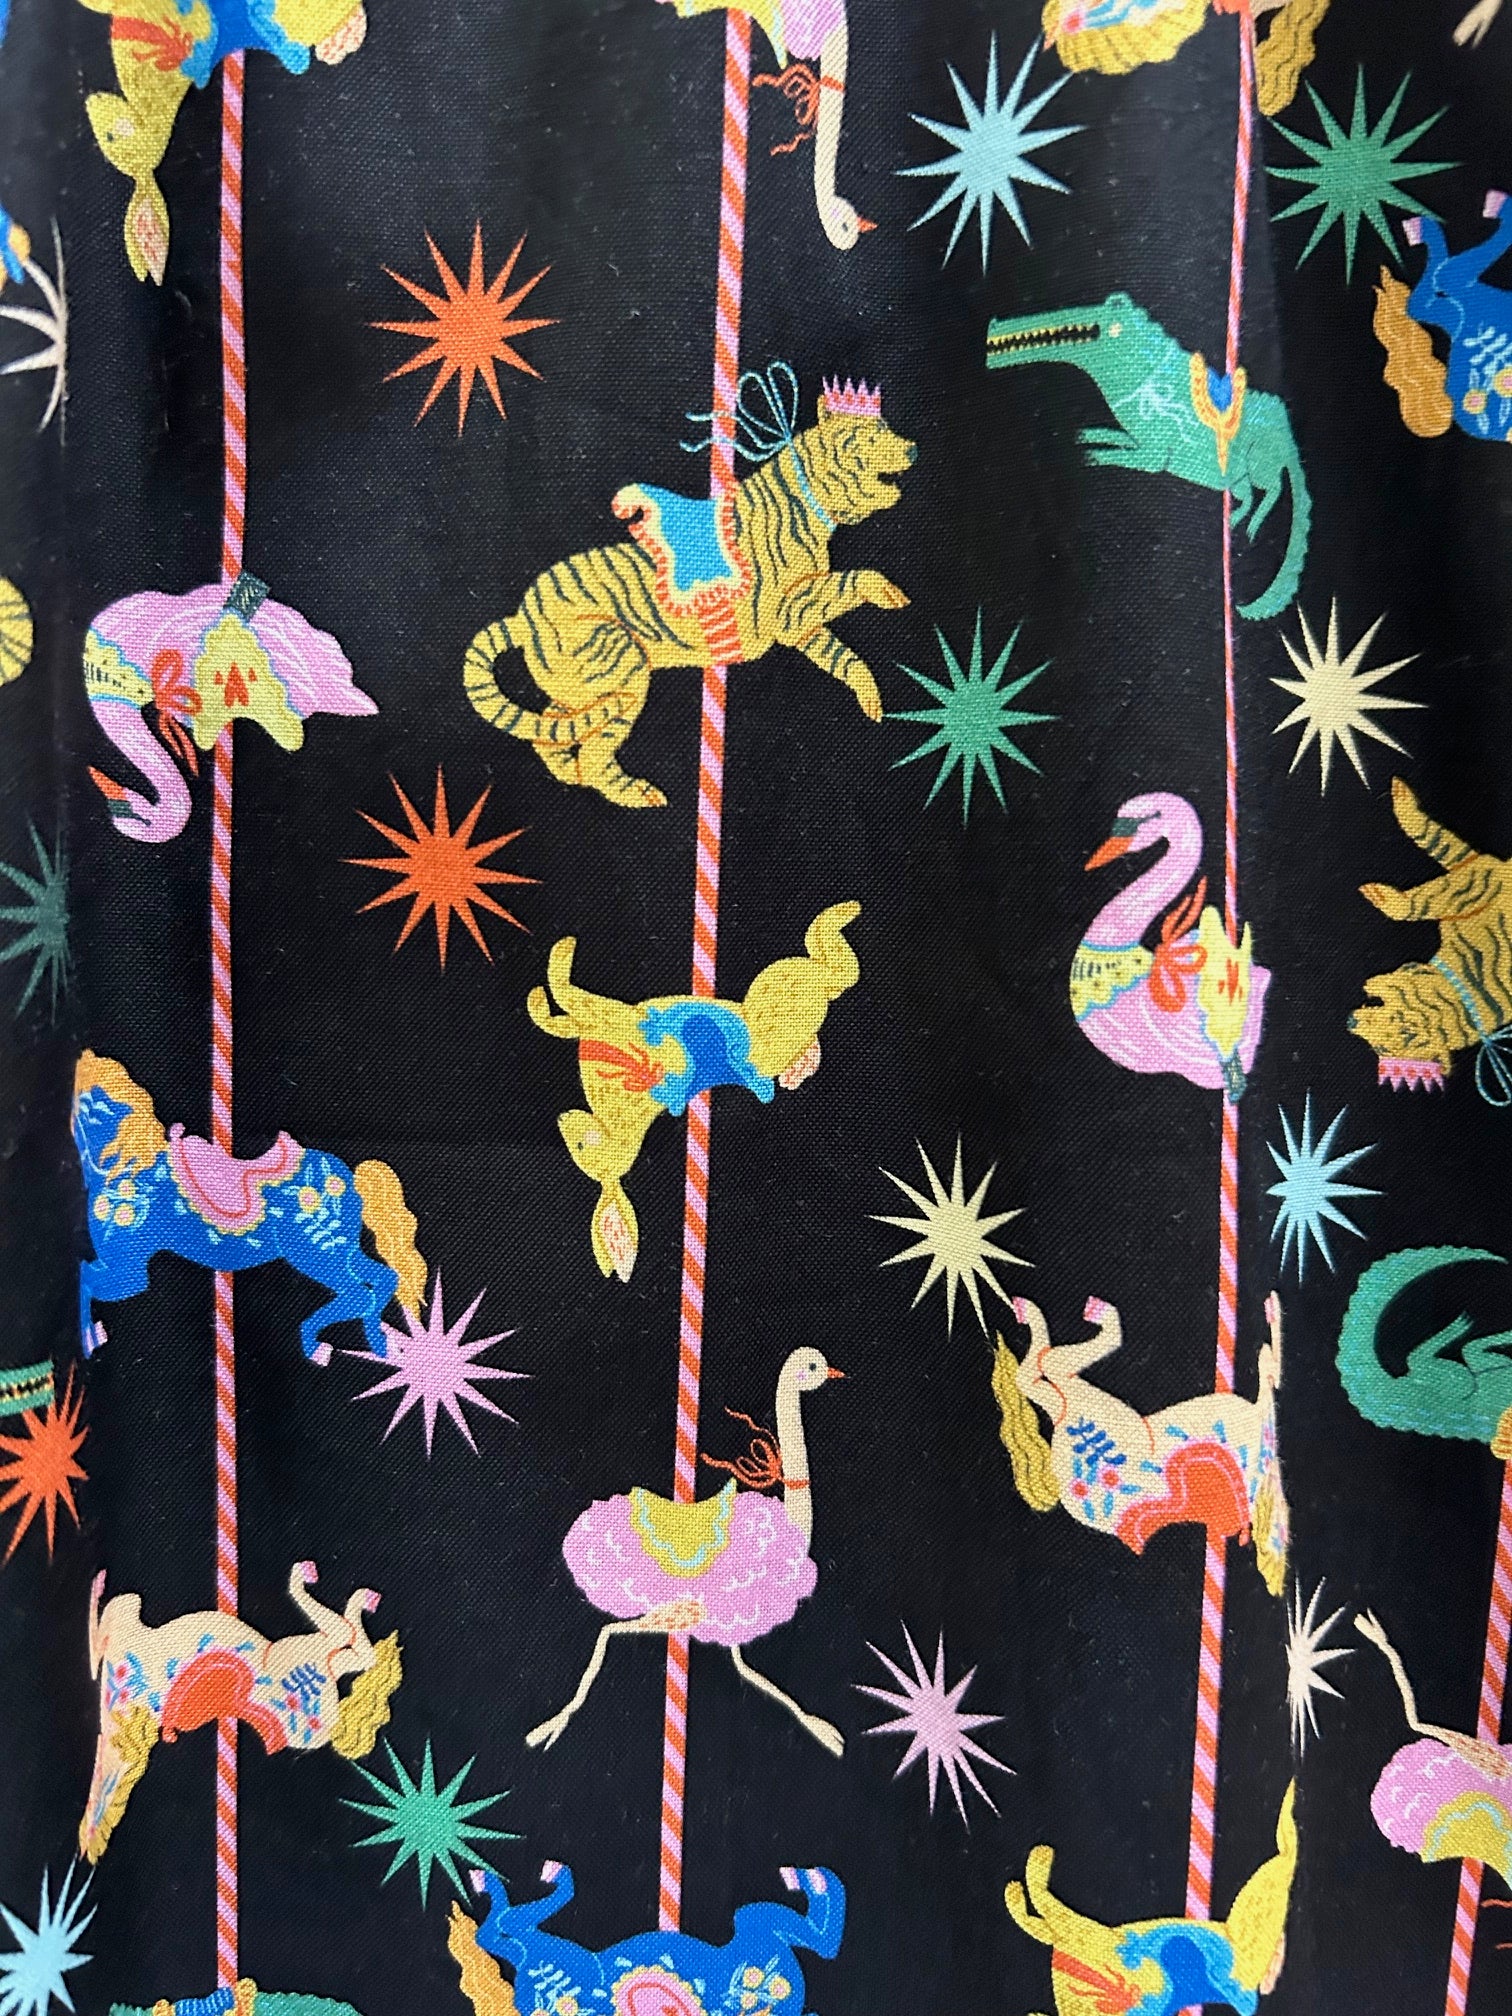 close up of the print showing merry go round animals on black background